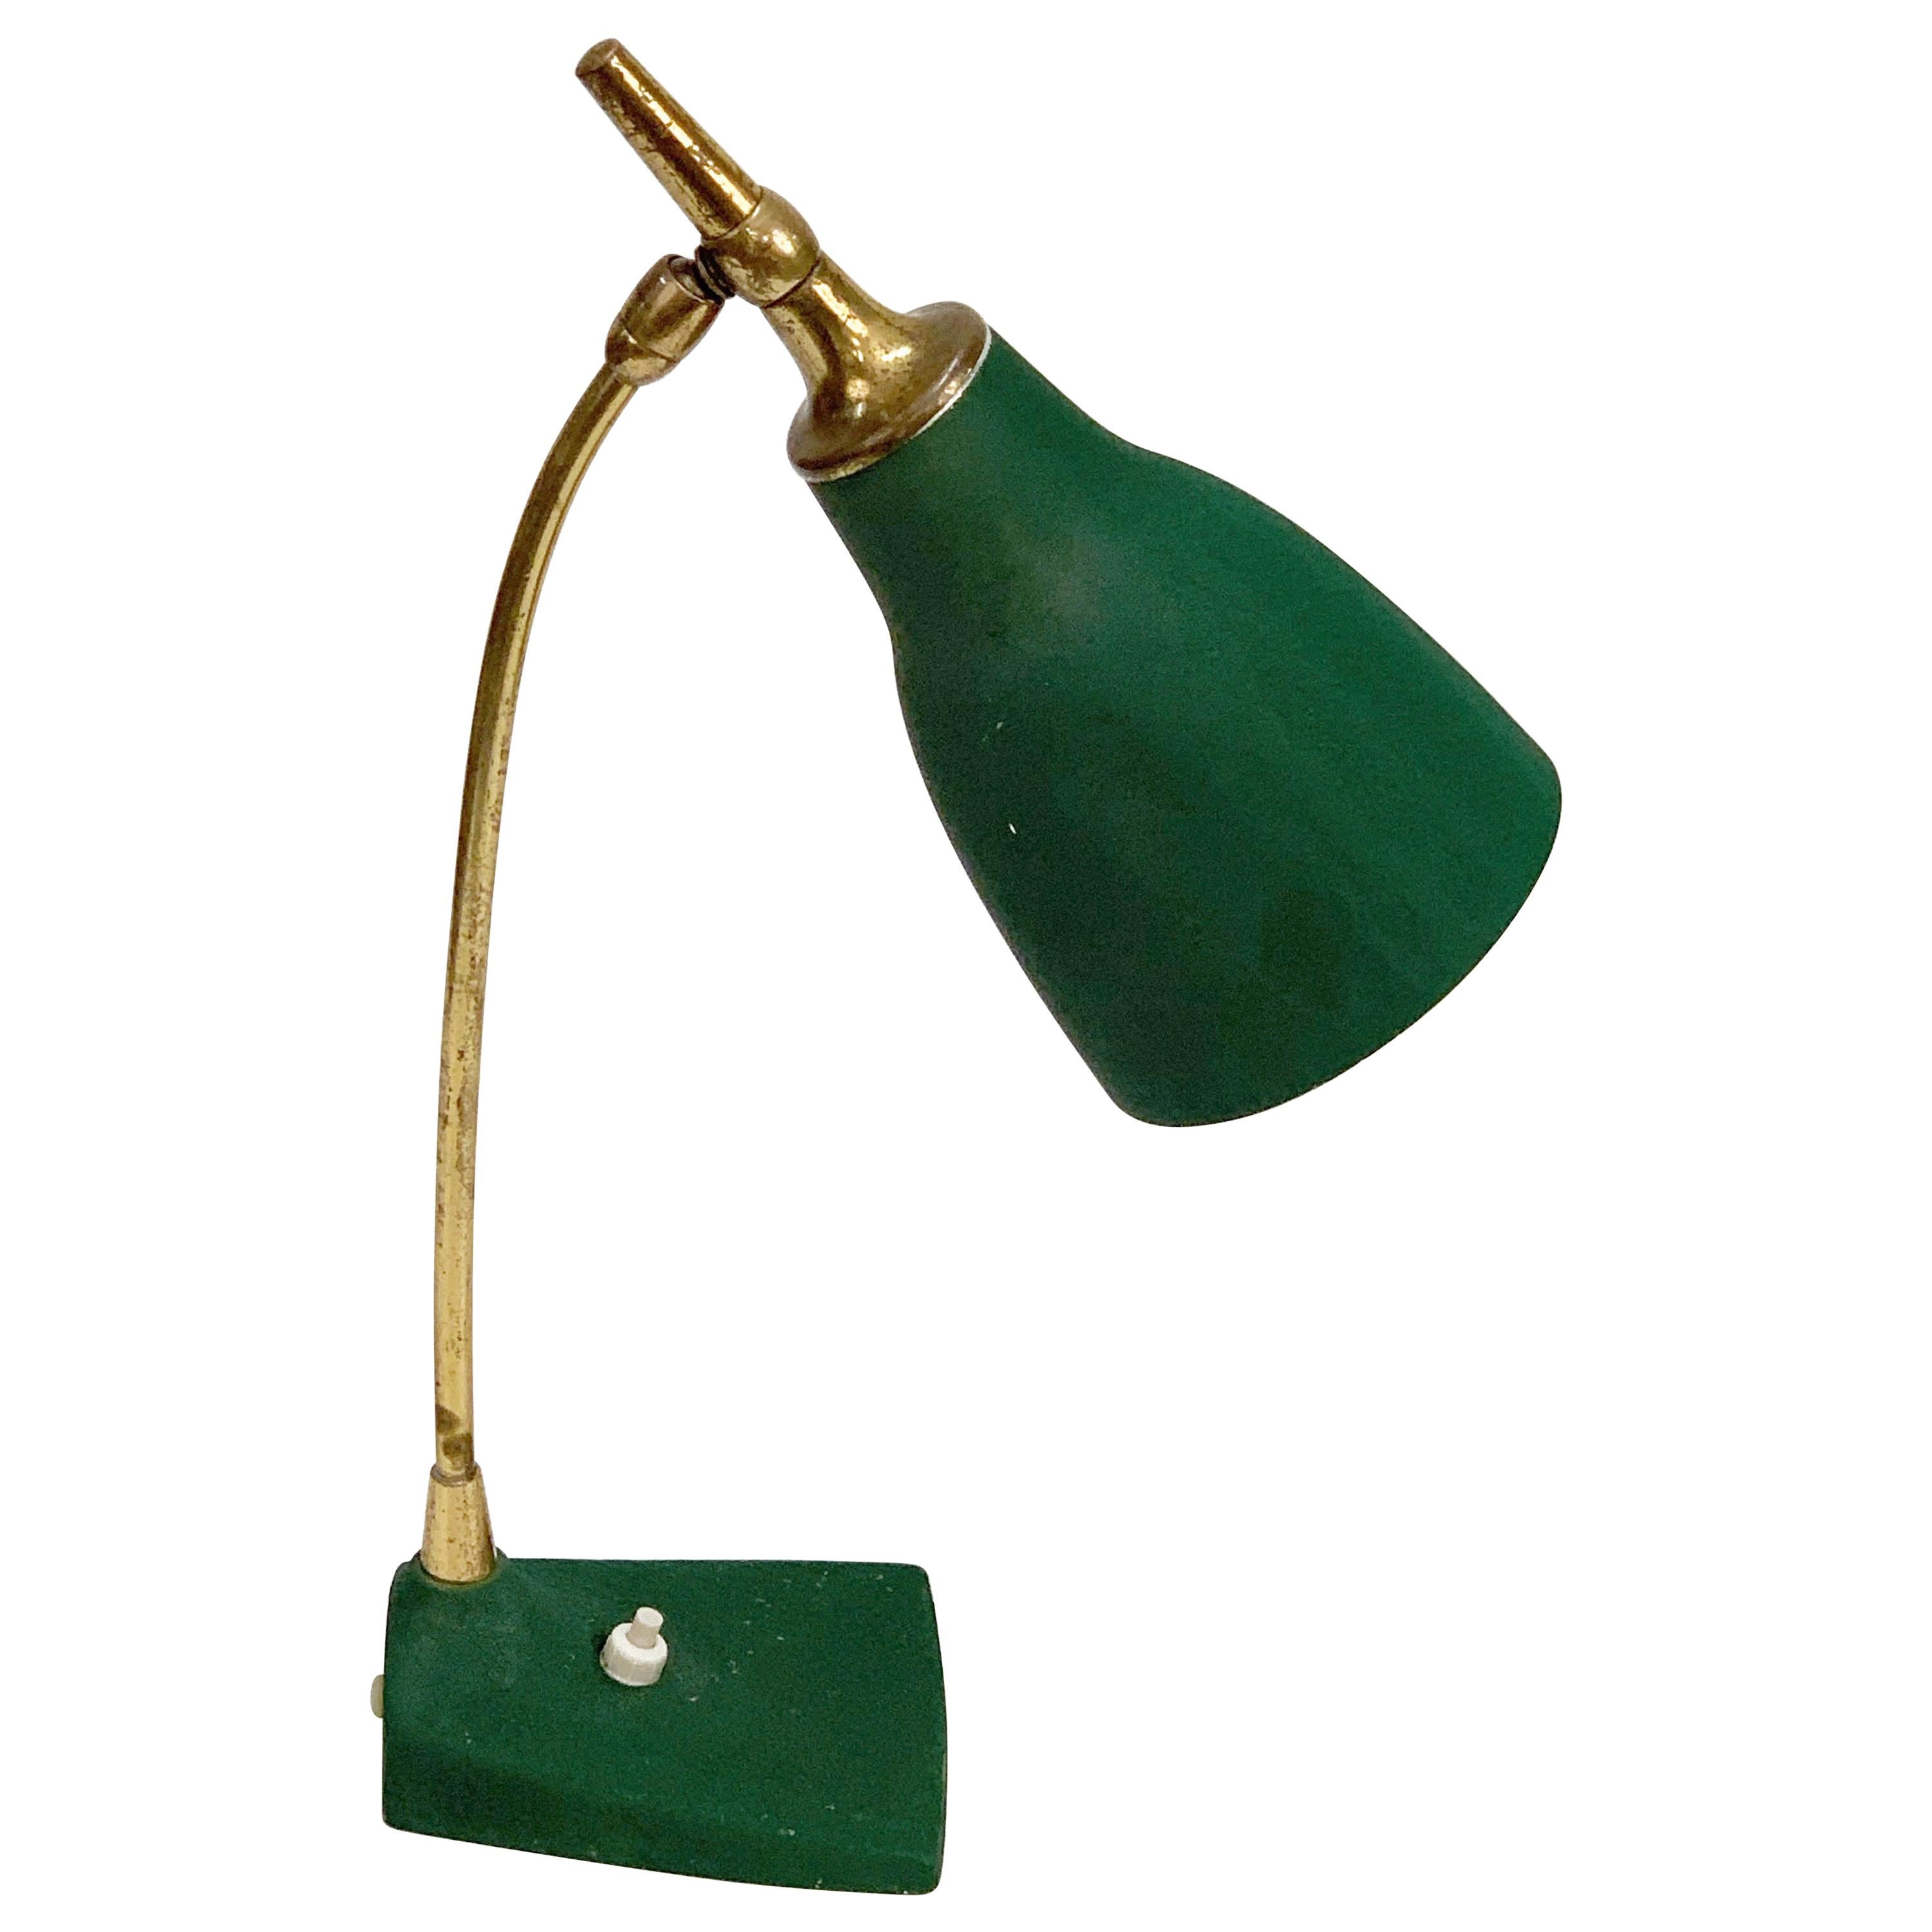 Midcentury Gebrüder Cosack Adjustable Green Brass and Cast Iron Table Lamp 1950s For Sale